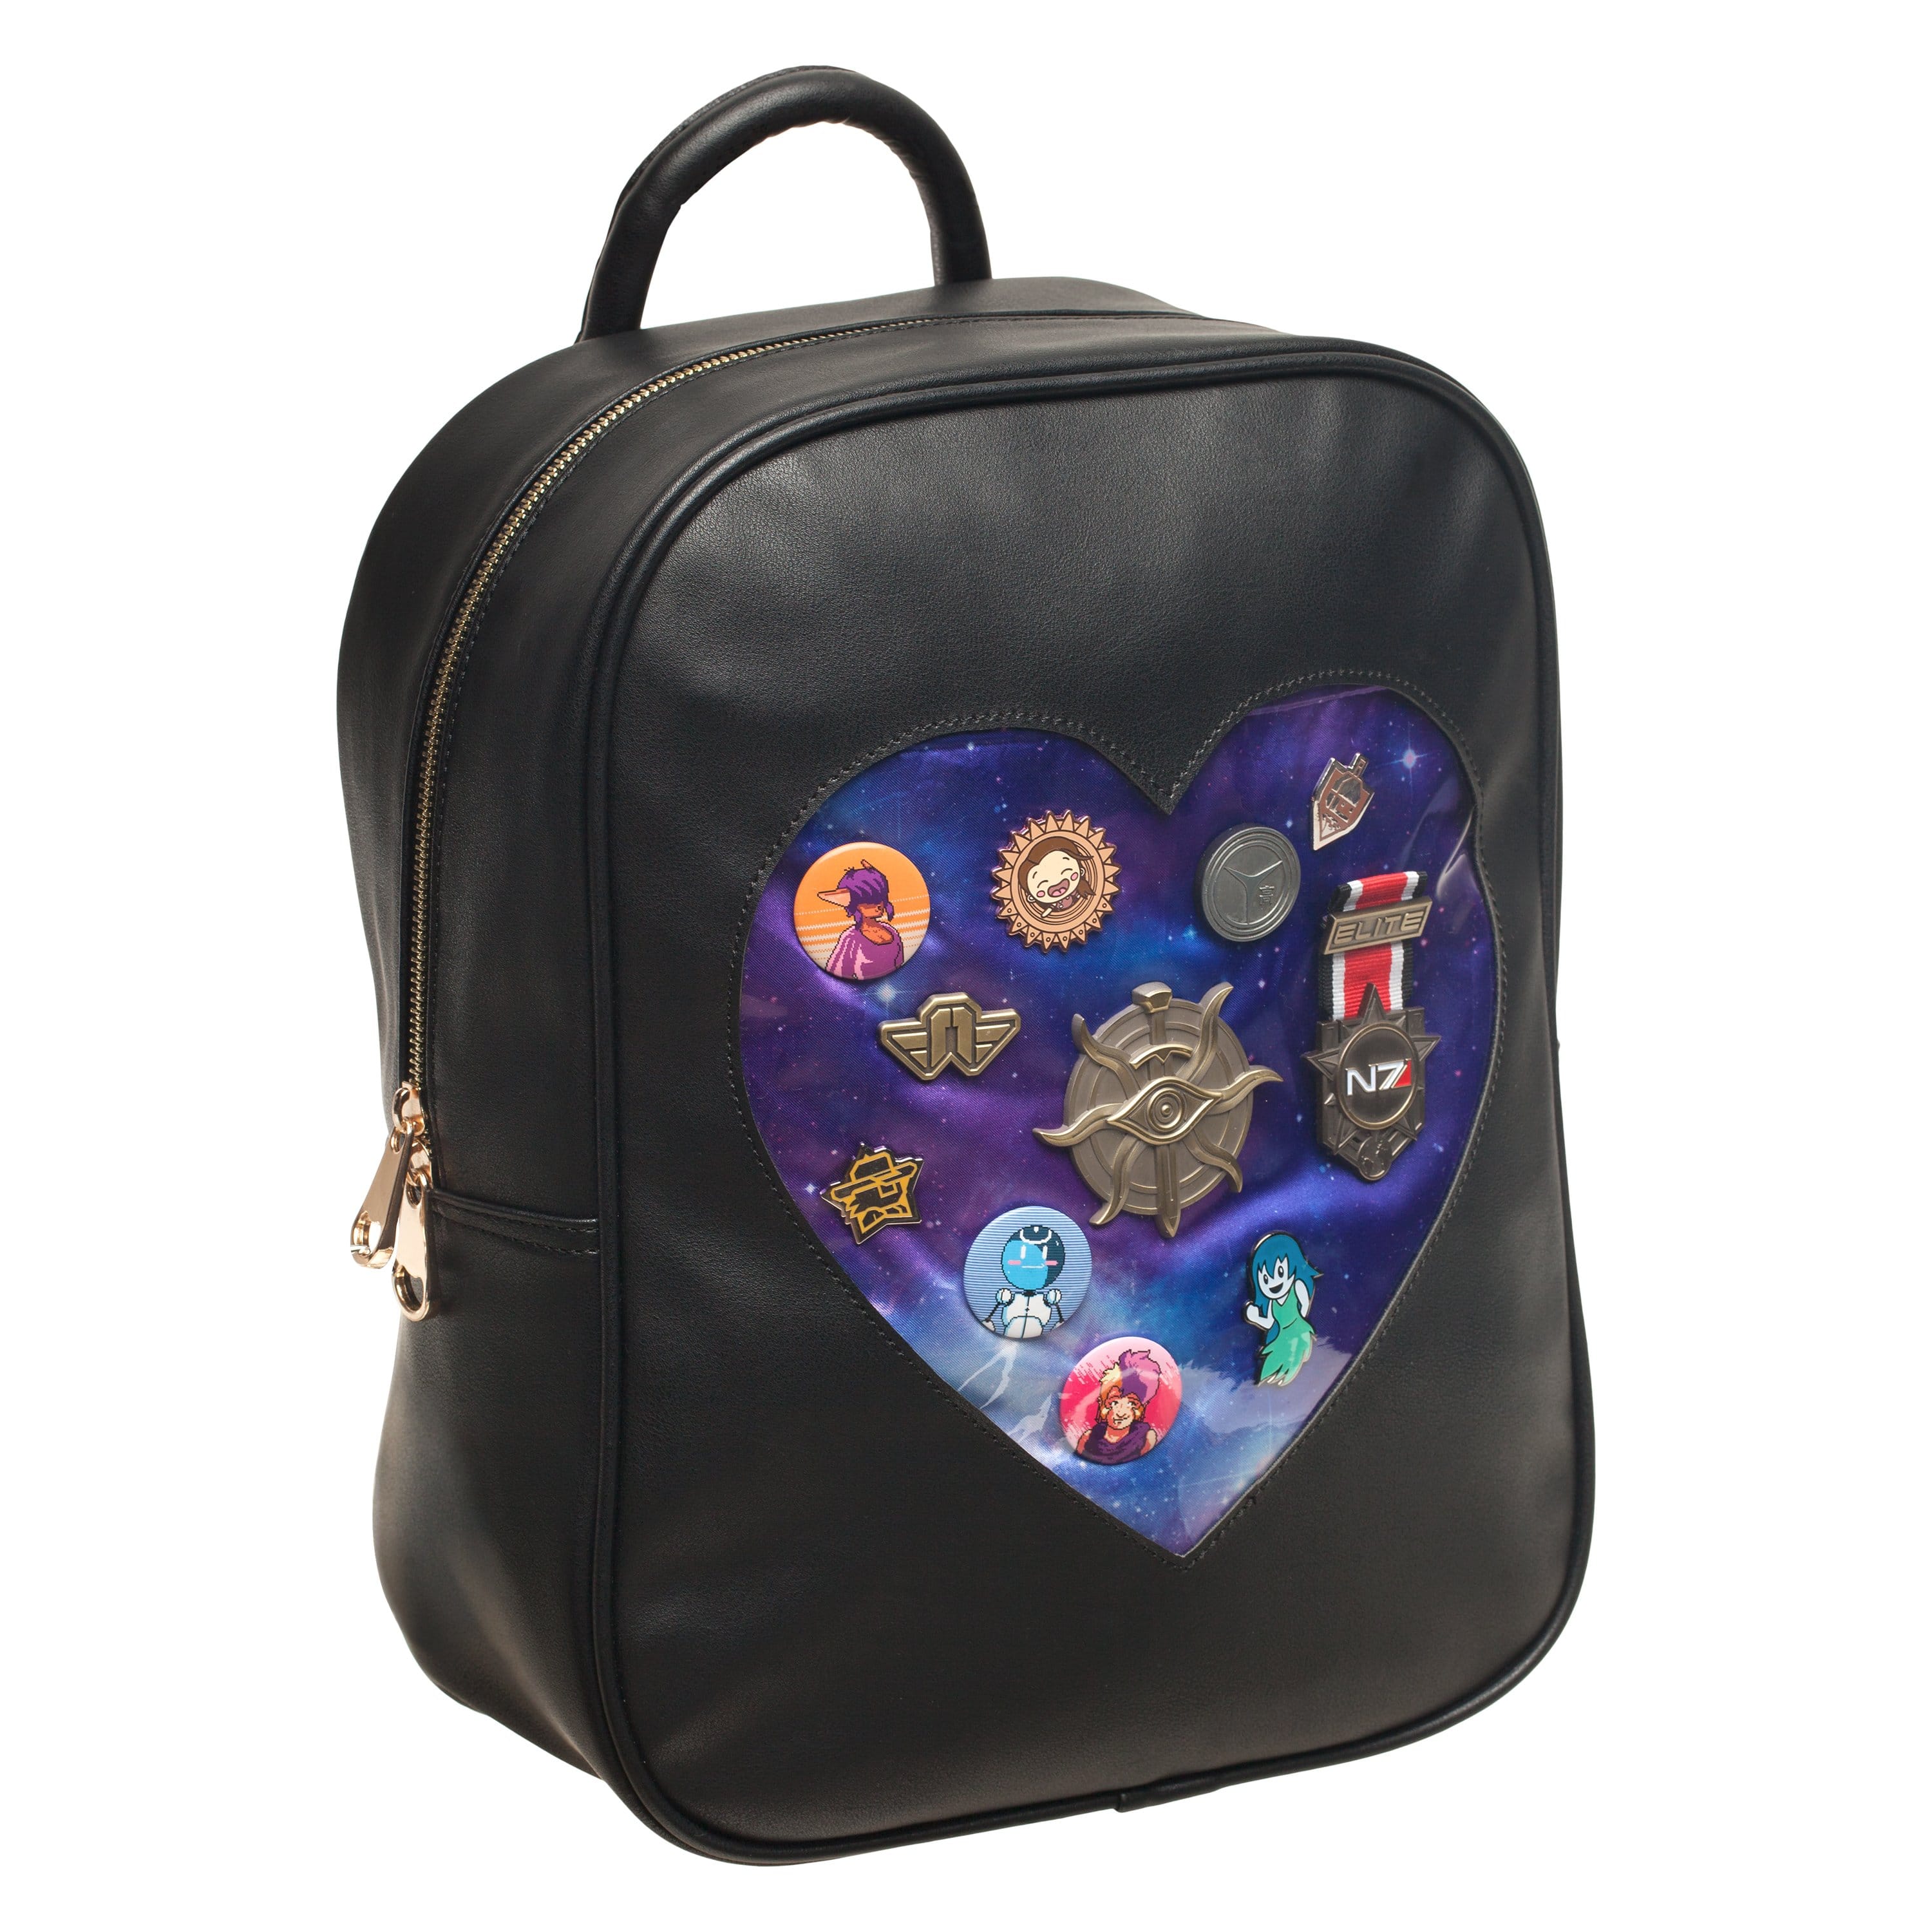 Sanshee - Galaxy Faux-Leather Ita-Bag with pins